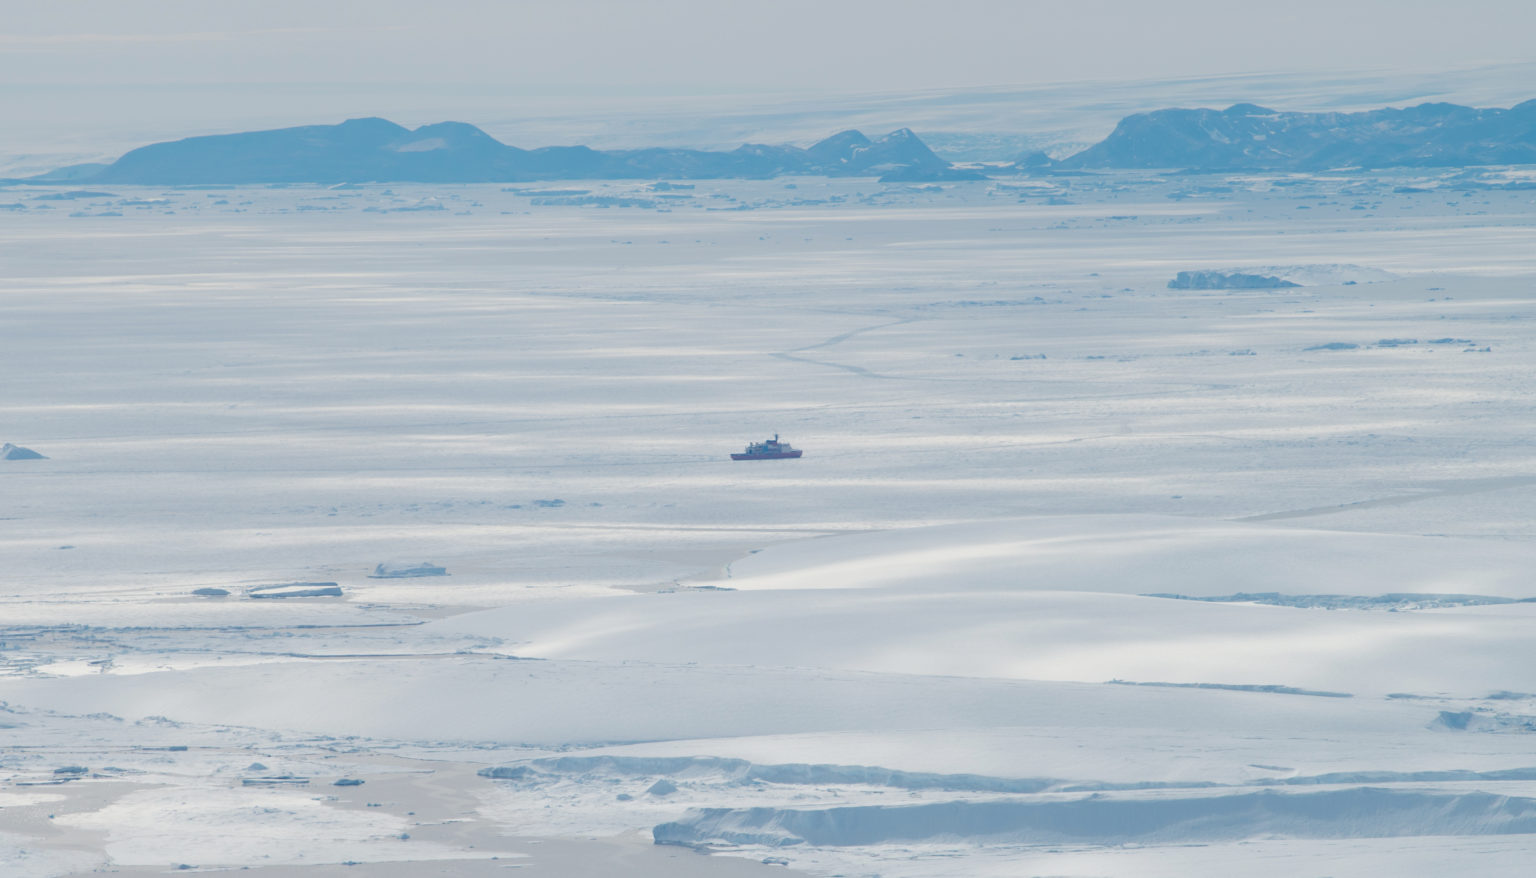 The Japanese icebreaker ship Shirase near the tip of the Shirase Glacier during the 58th Japanese Antarctic Research Expedition. (Photo by Kazuya Ono)